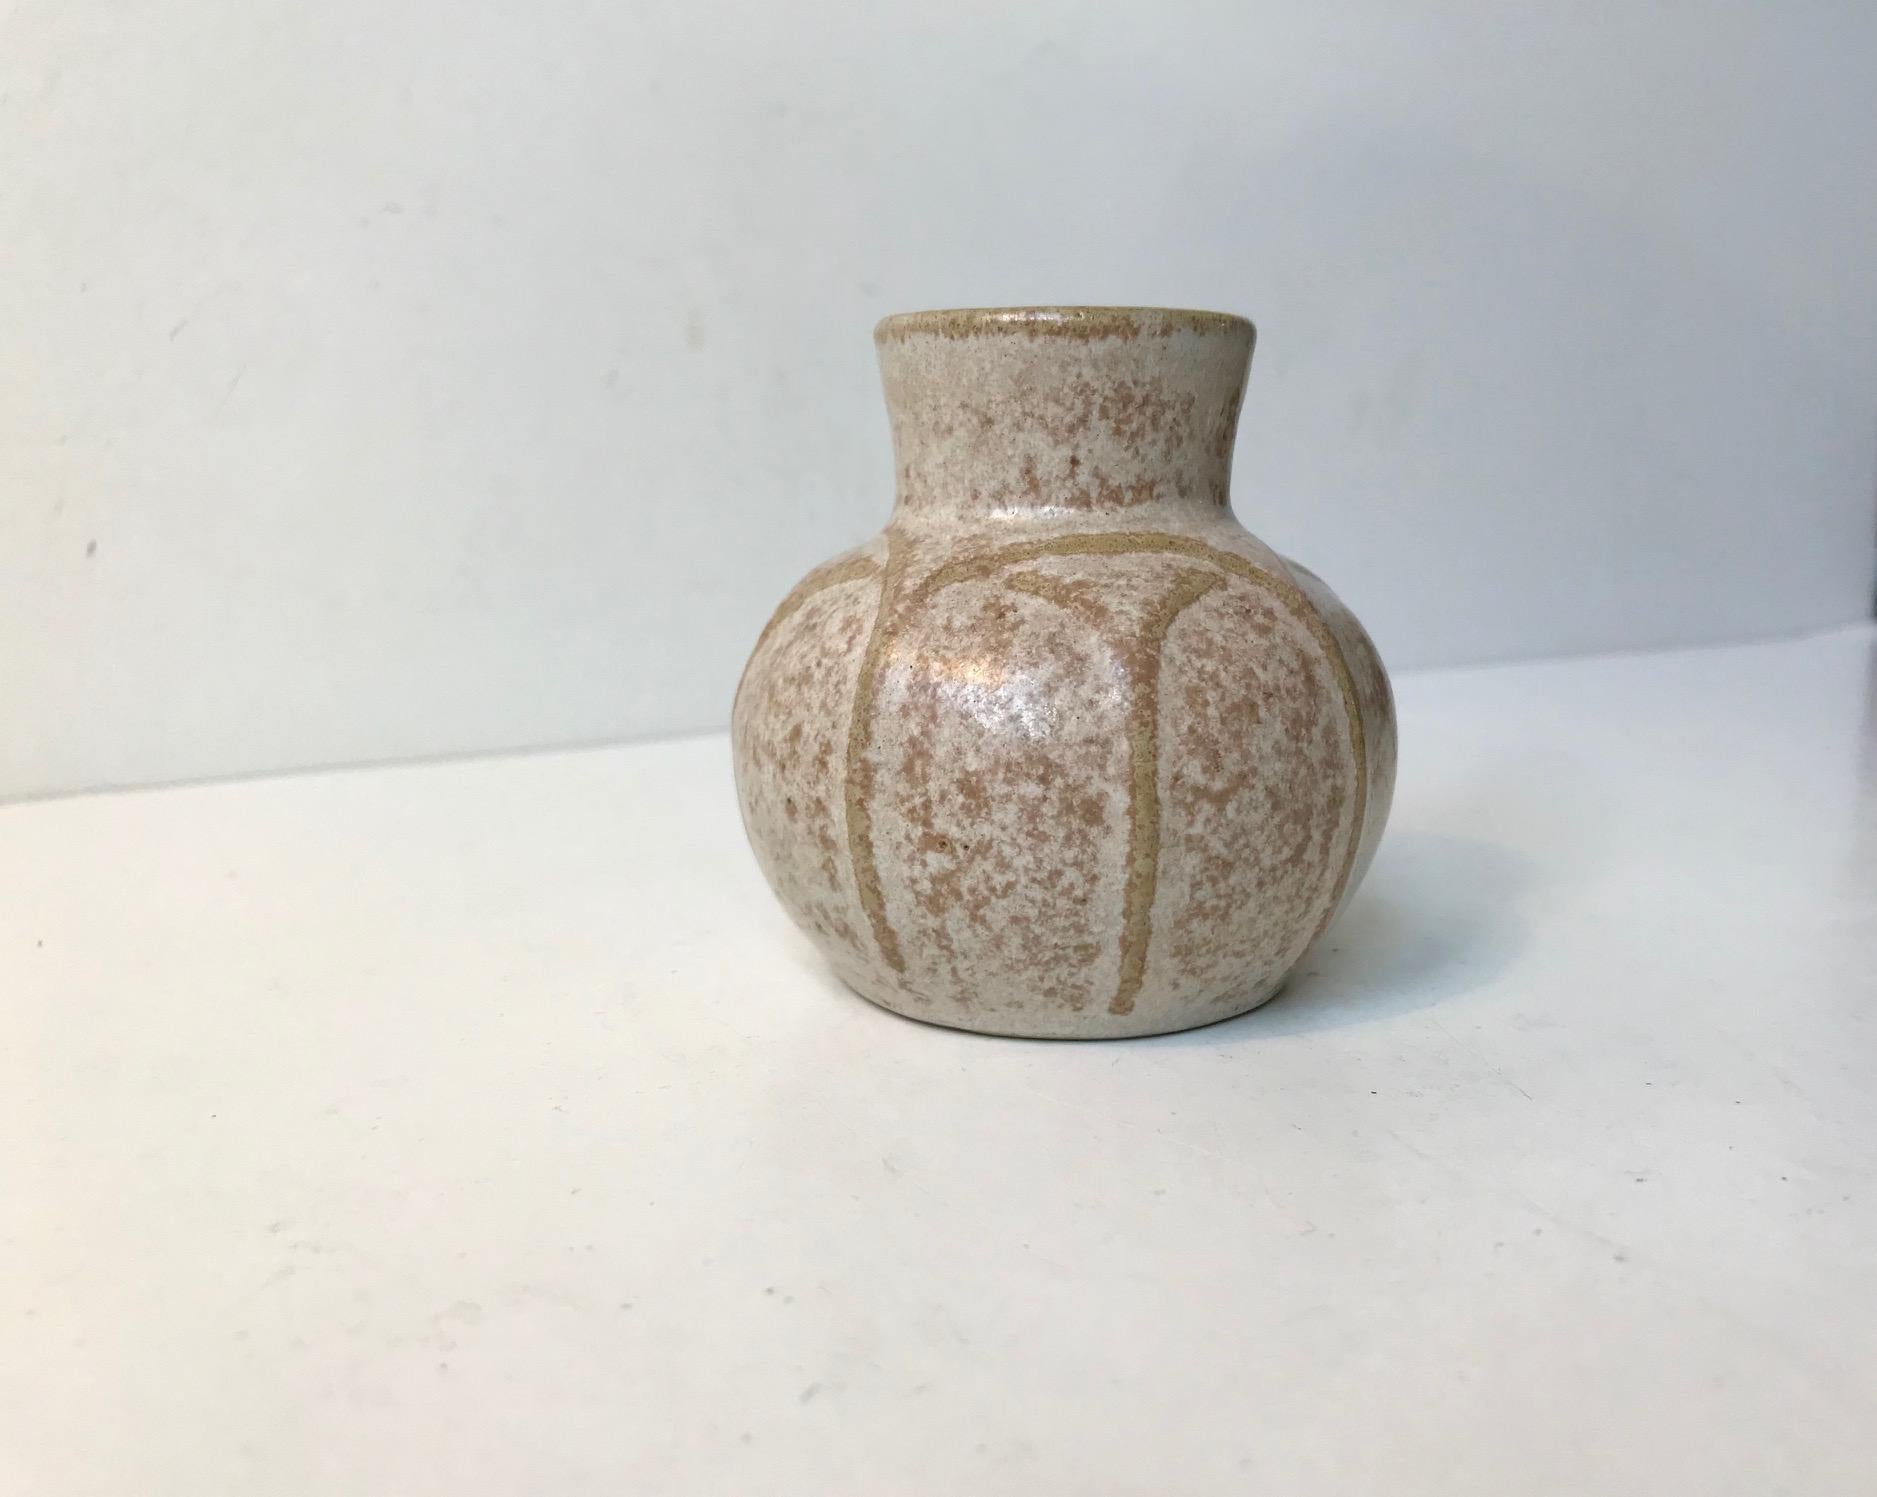 - Among the most desirable pieces from L. Hjorth Ceramic in Denmark
- This small vase has delicate, soft and speckled glaze
- Bears resemblance to similar designs from Arne Bang and Eva Stahr Nielsen who also strived towards a visual glaze effect